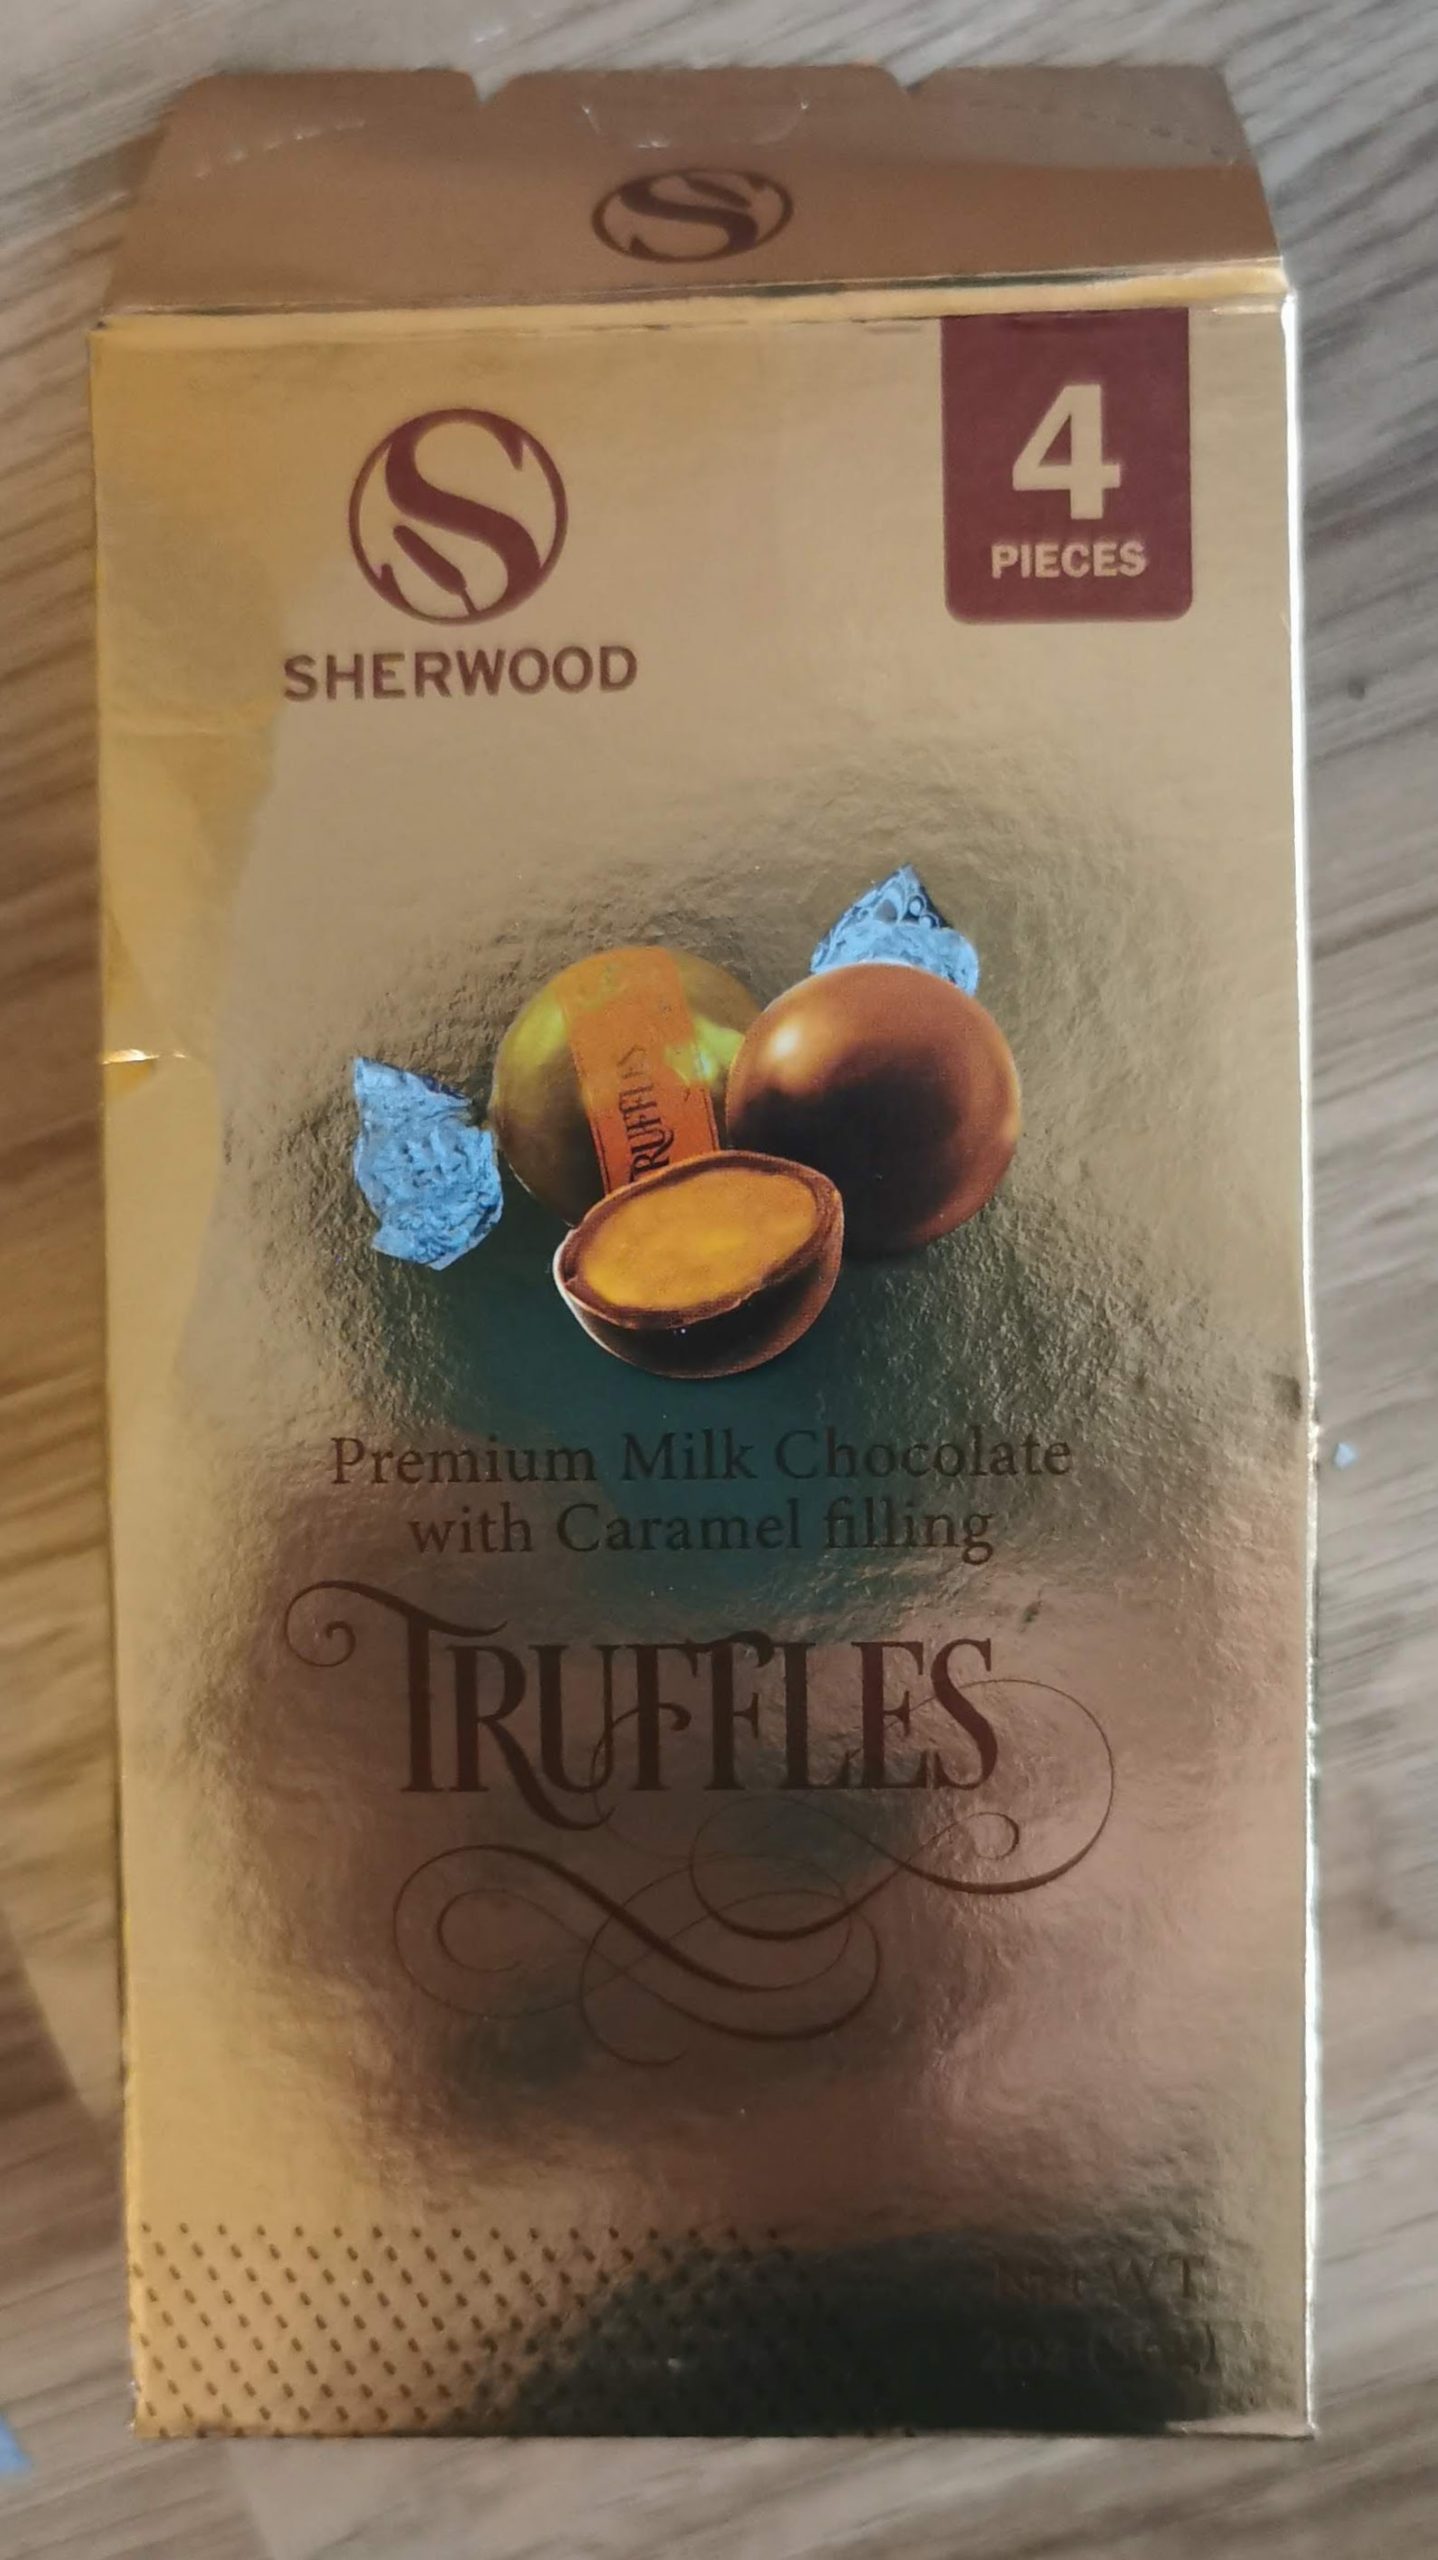 You are currently viewing Sherwood Premium Milk Chocolate and Caramel Truffles (Dollar Tree)